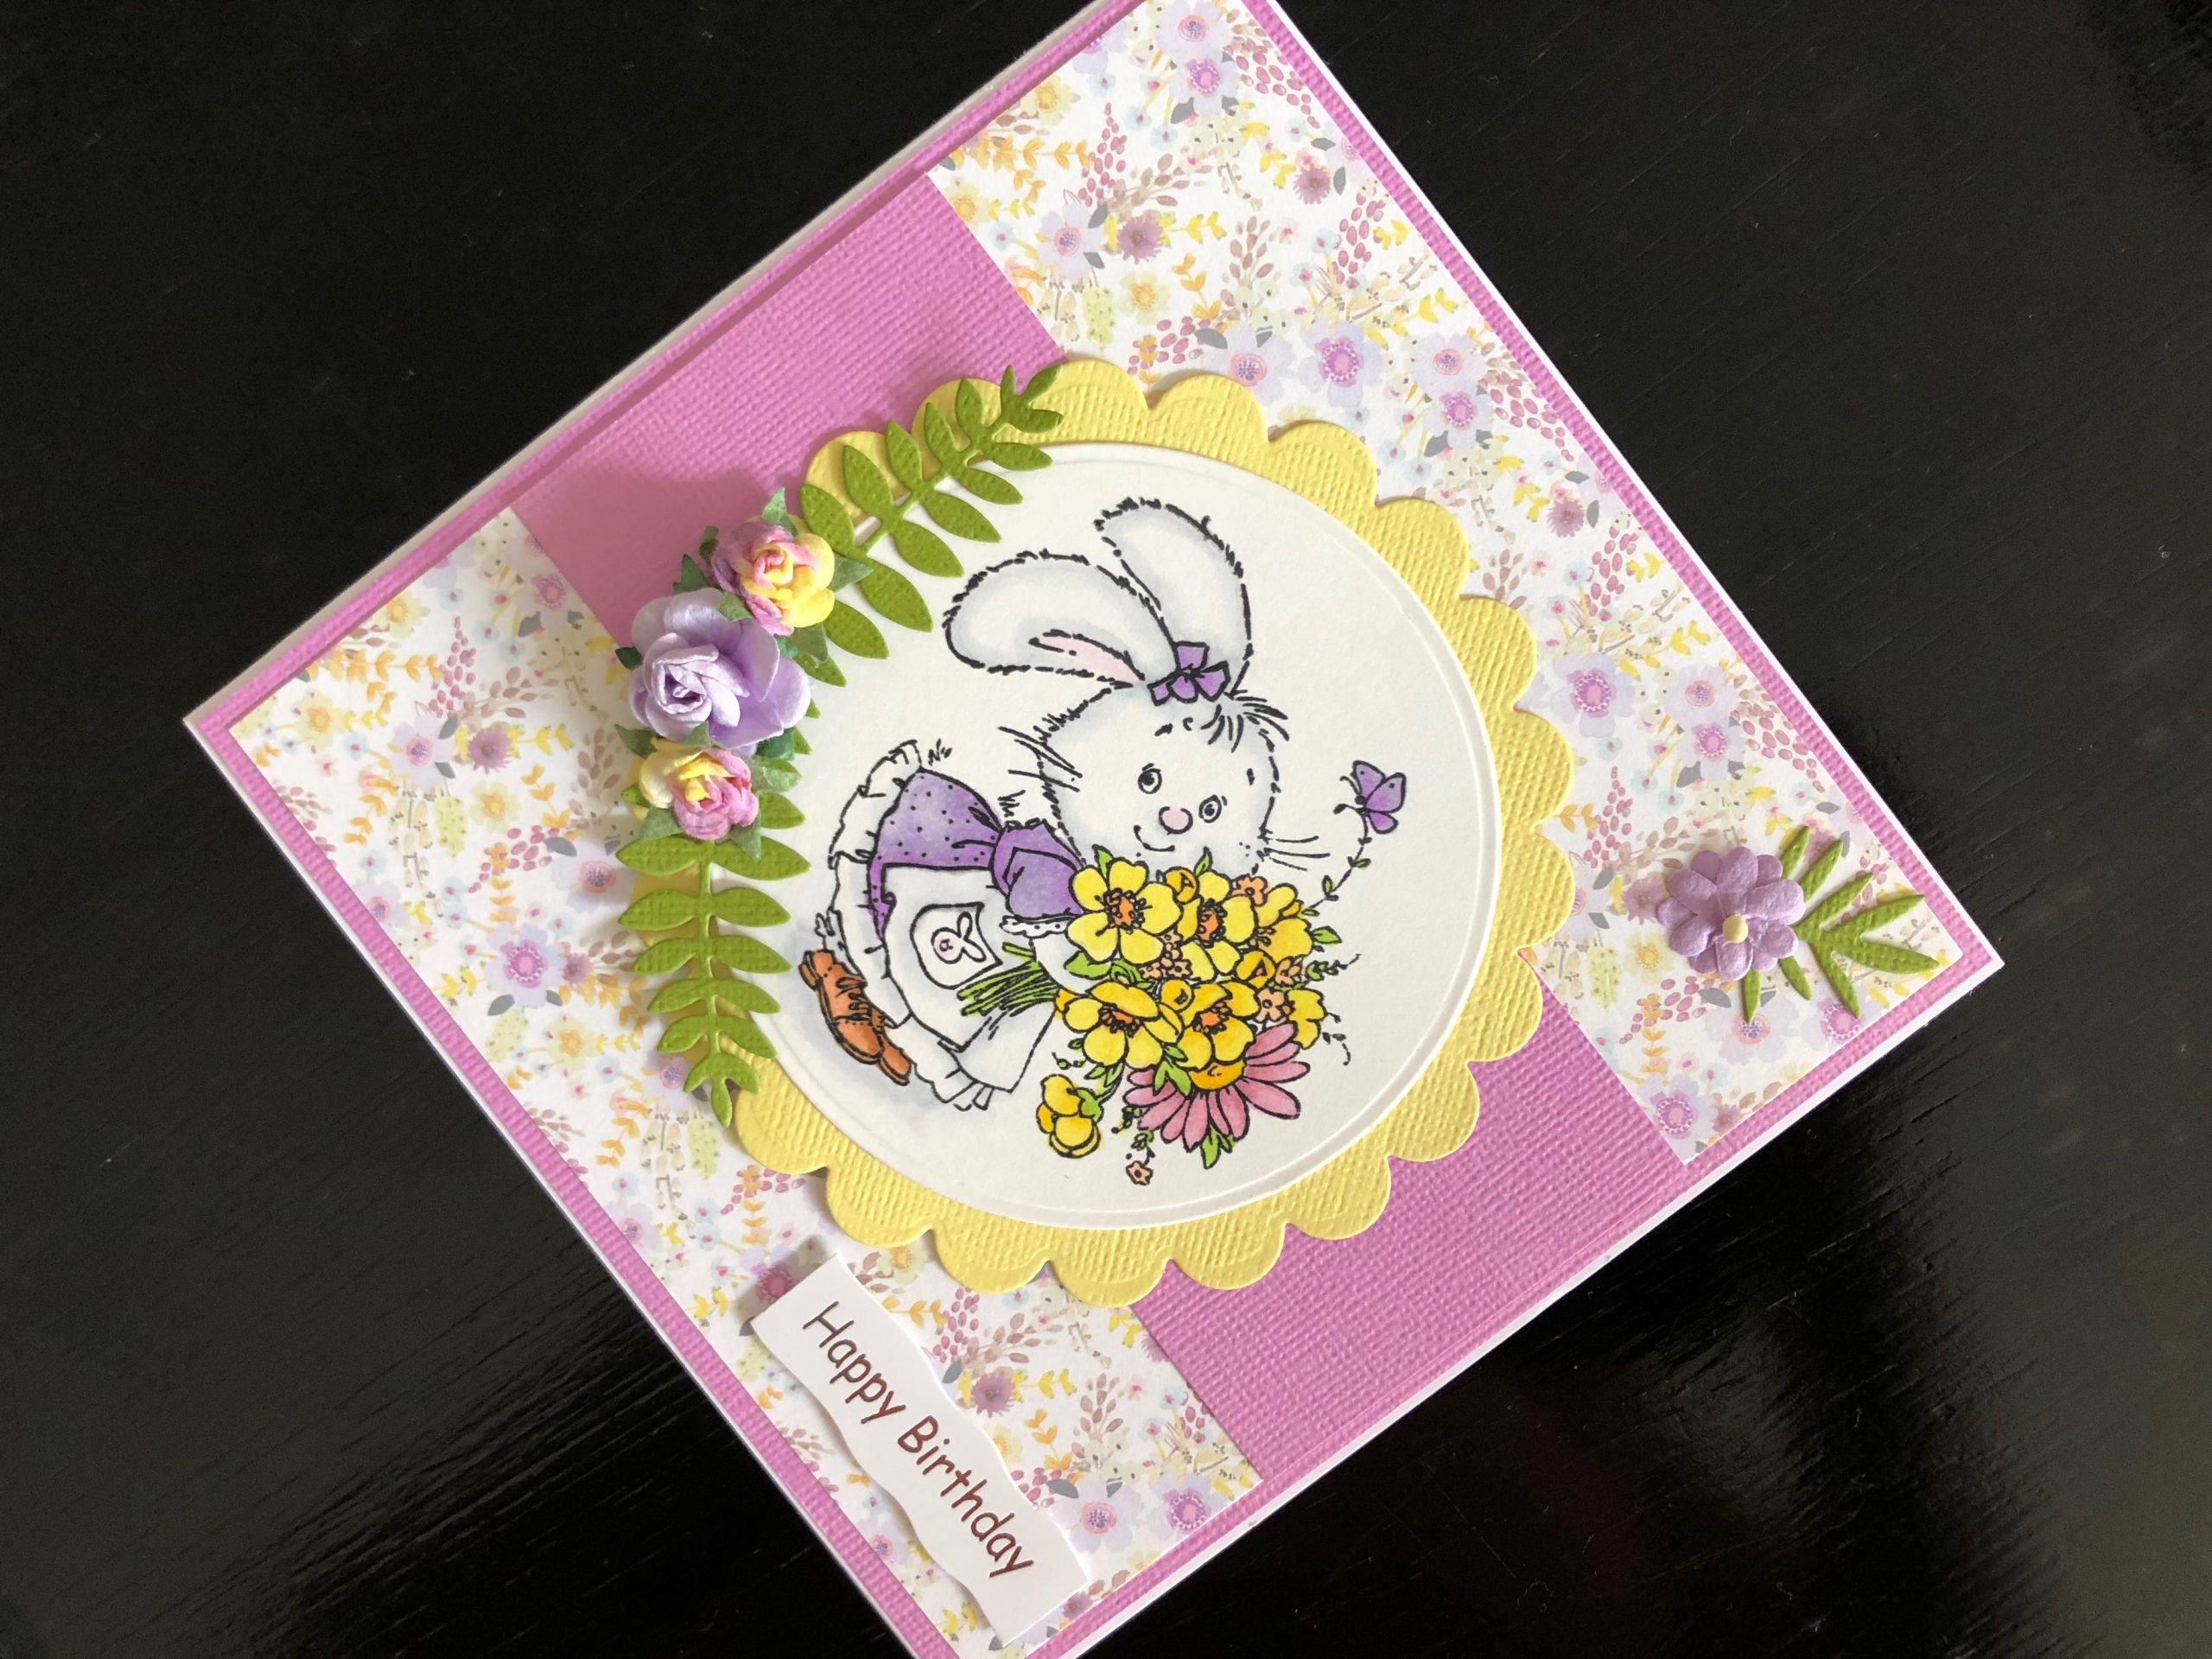 Hand made birthday card with a stamped rabbit image and spring flowers